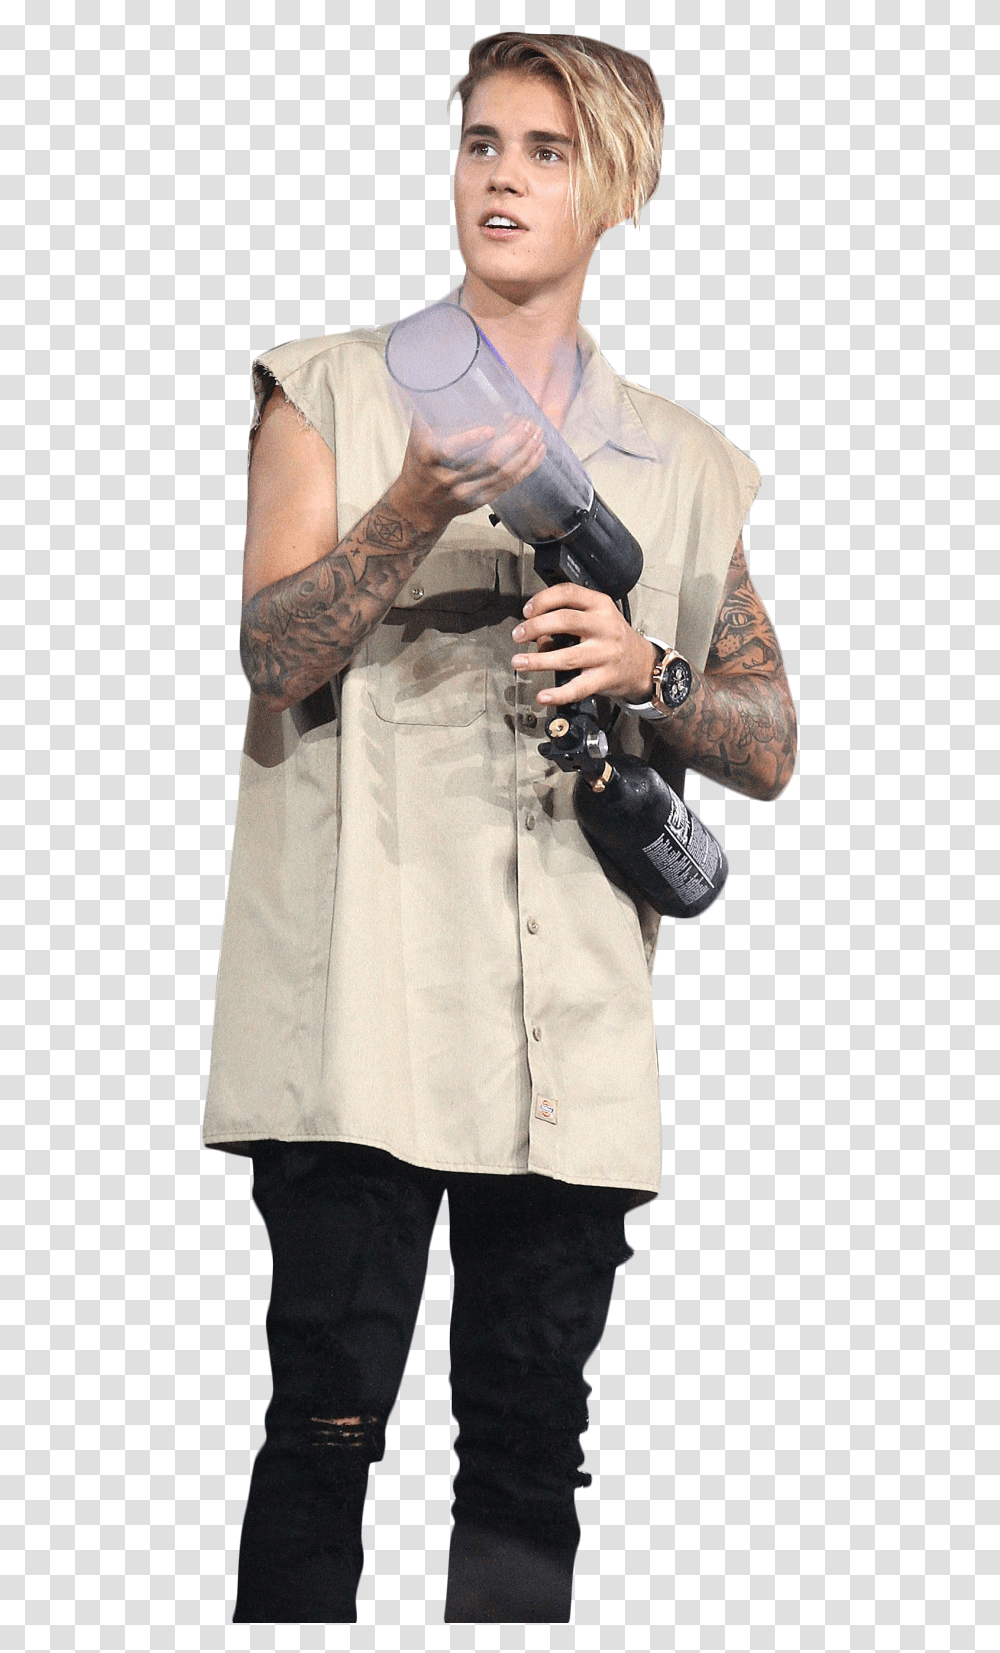 Justin Bieber Holding Gas Canone Image Justin Bieber Caroon, Skin, Person, Human, Tattoo Transparent Png